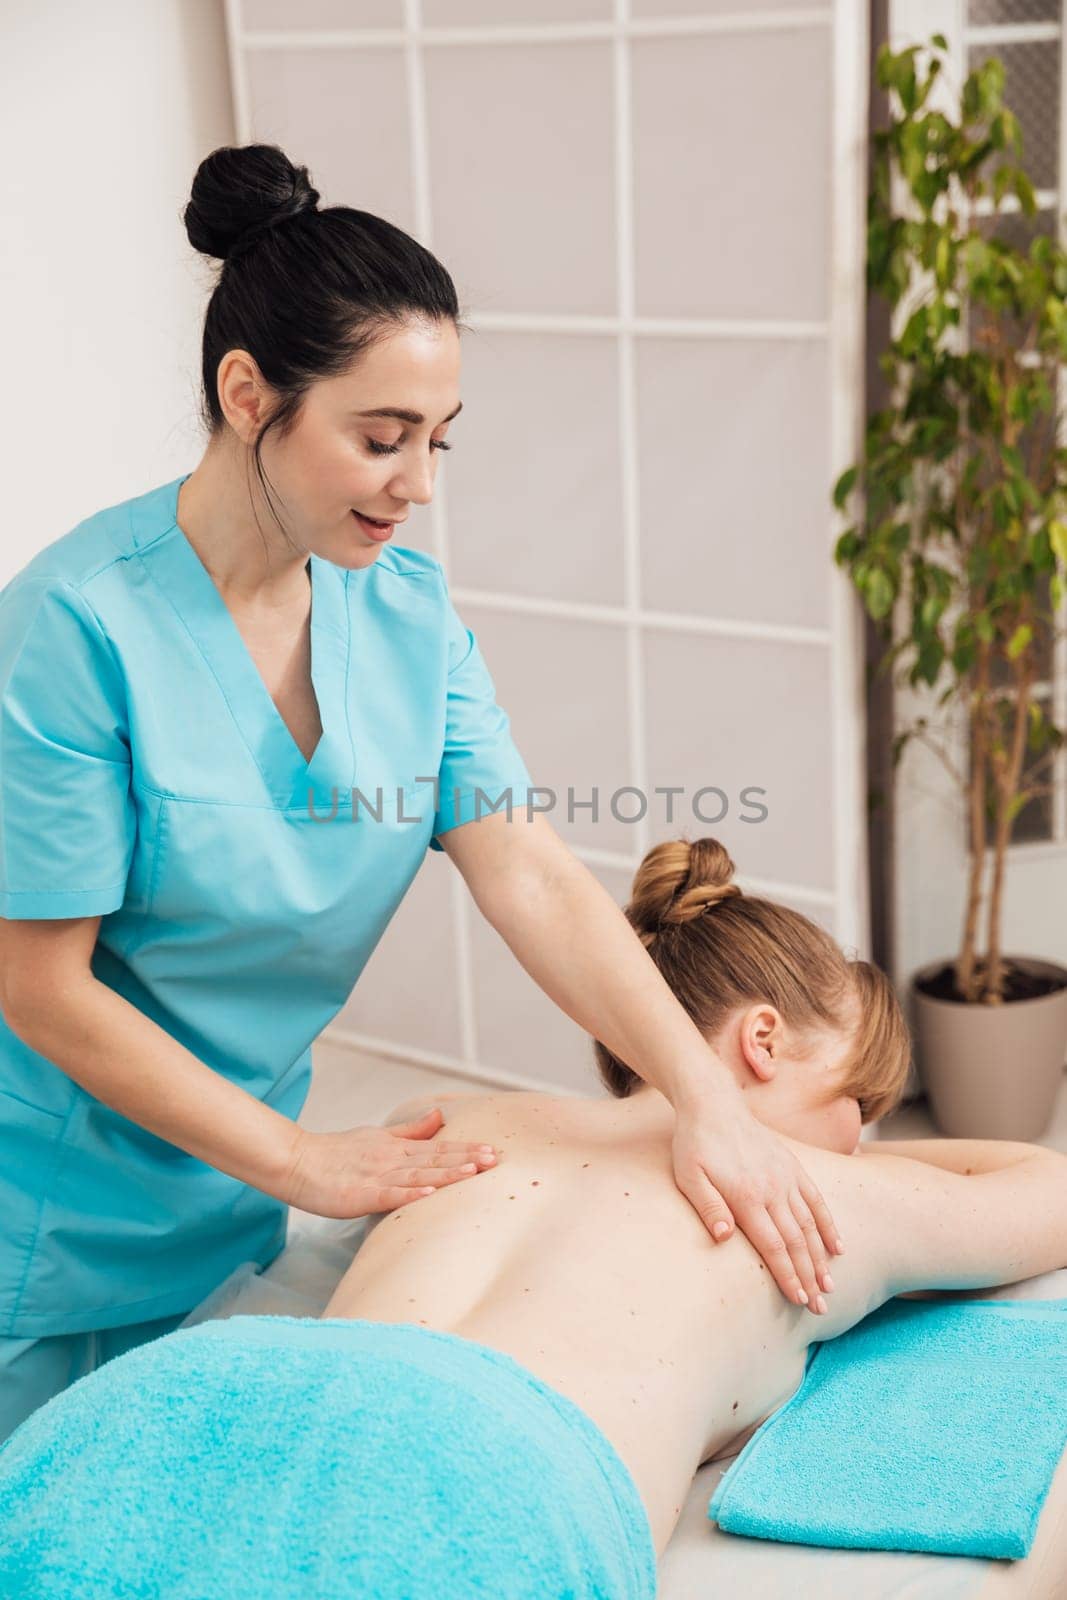 Masseuse doing a therapeutic relaxing back massage by Simakov